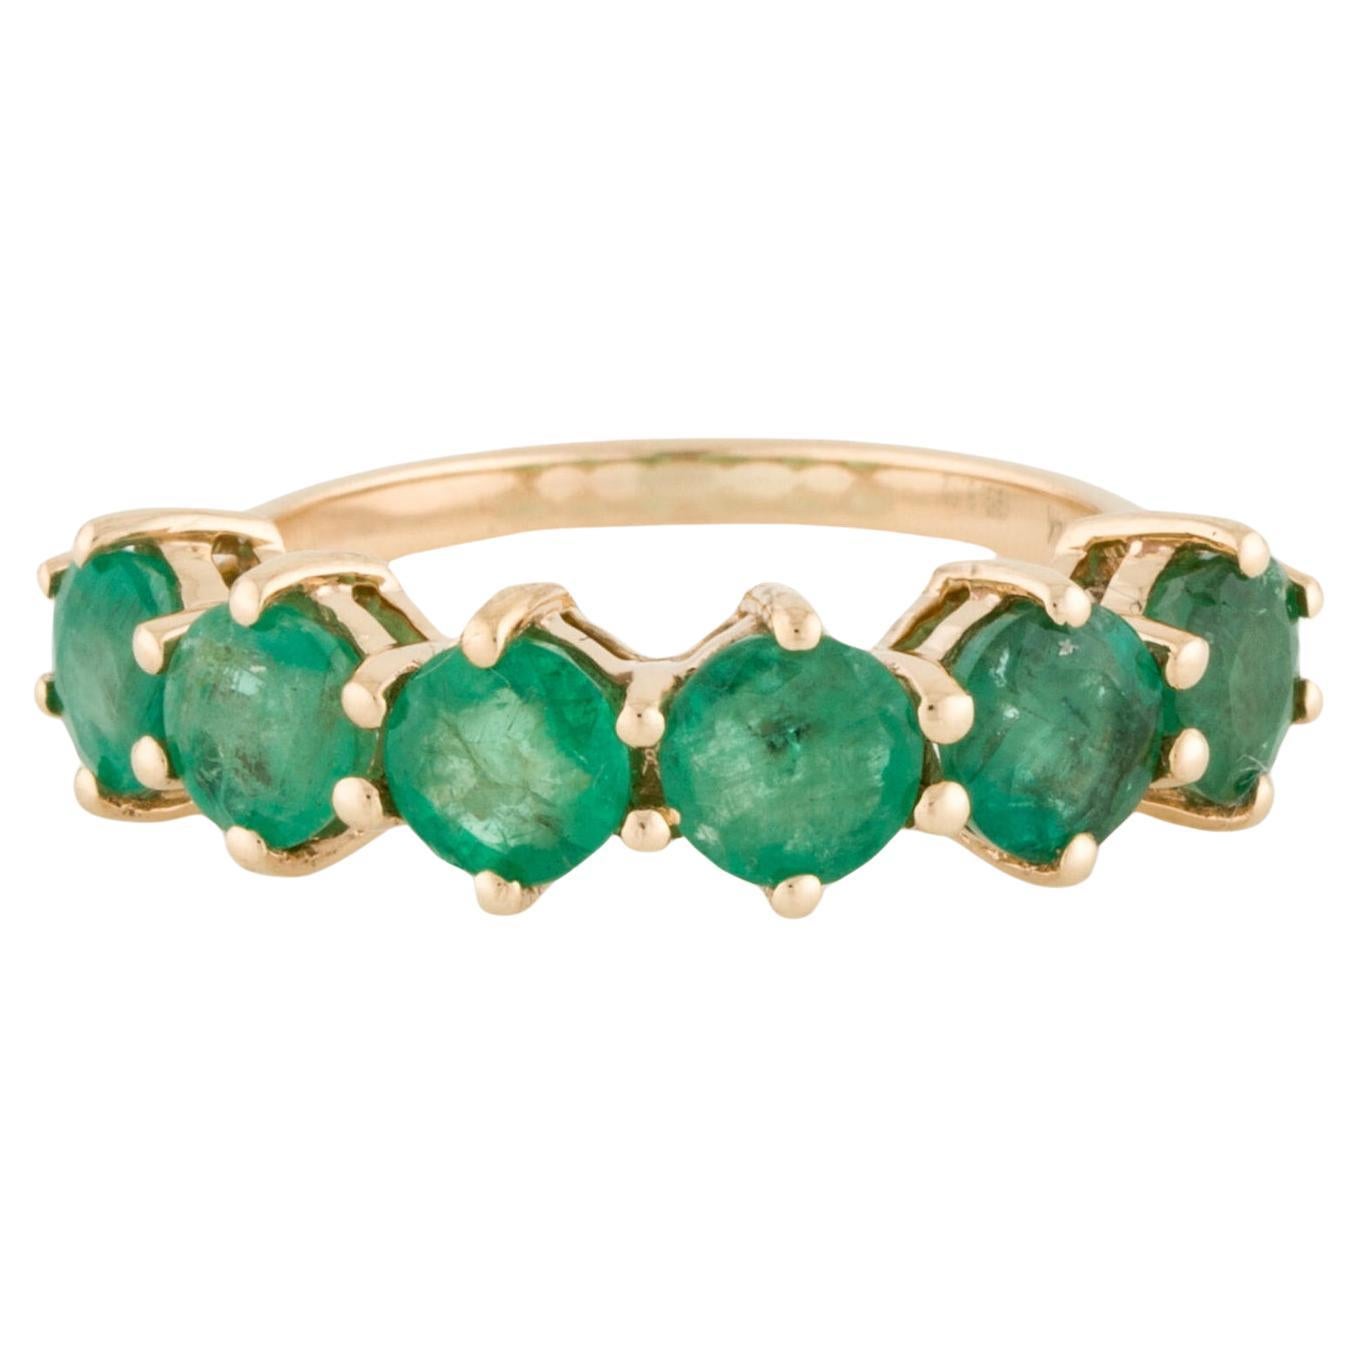 14K Emerald Band Ring 2.29ctw - Size 6.75 - Timeless Elegance, Luxurious Design For Sale